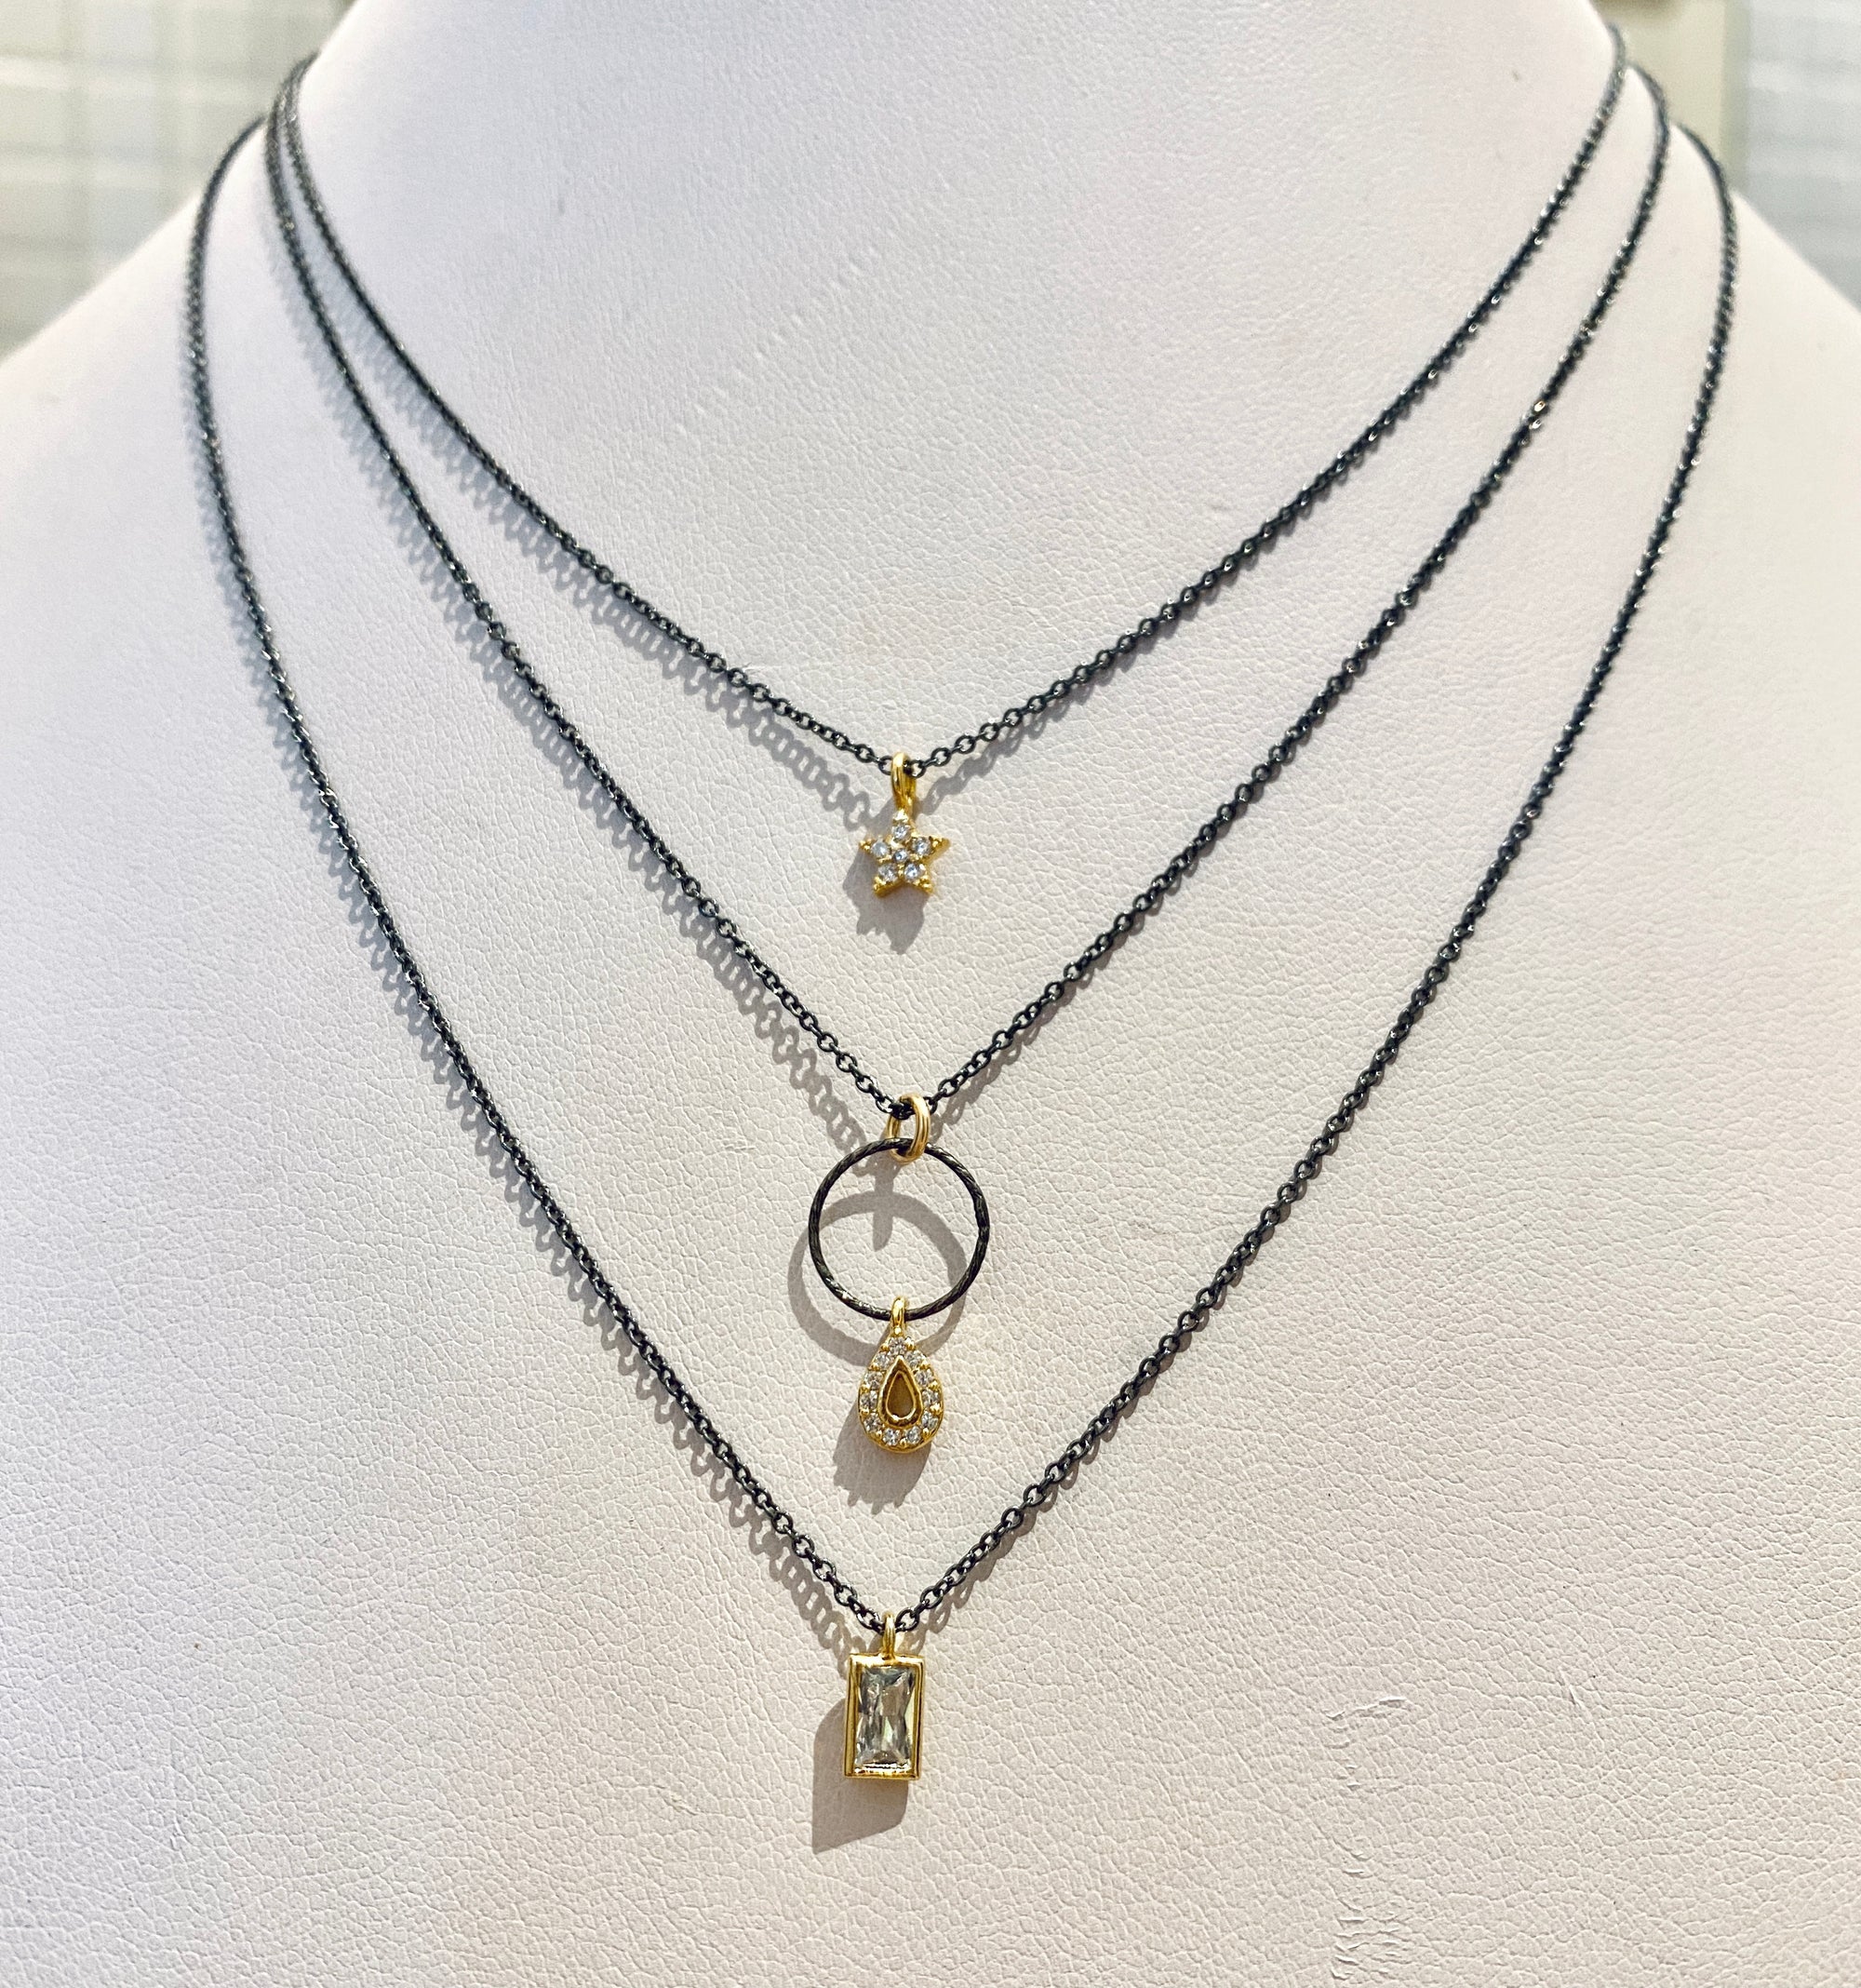 Dainty Crystal Necklaces